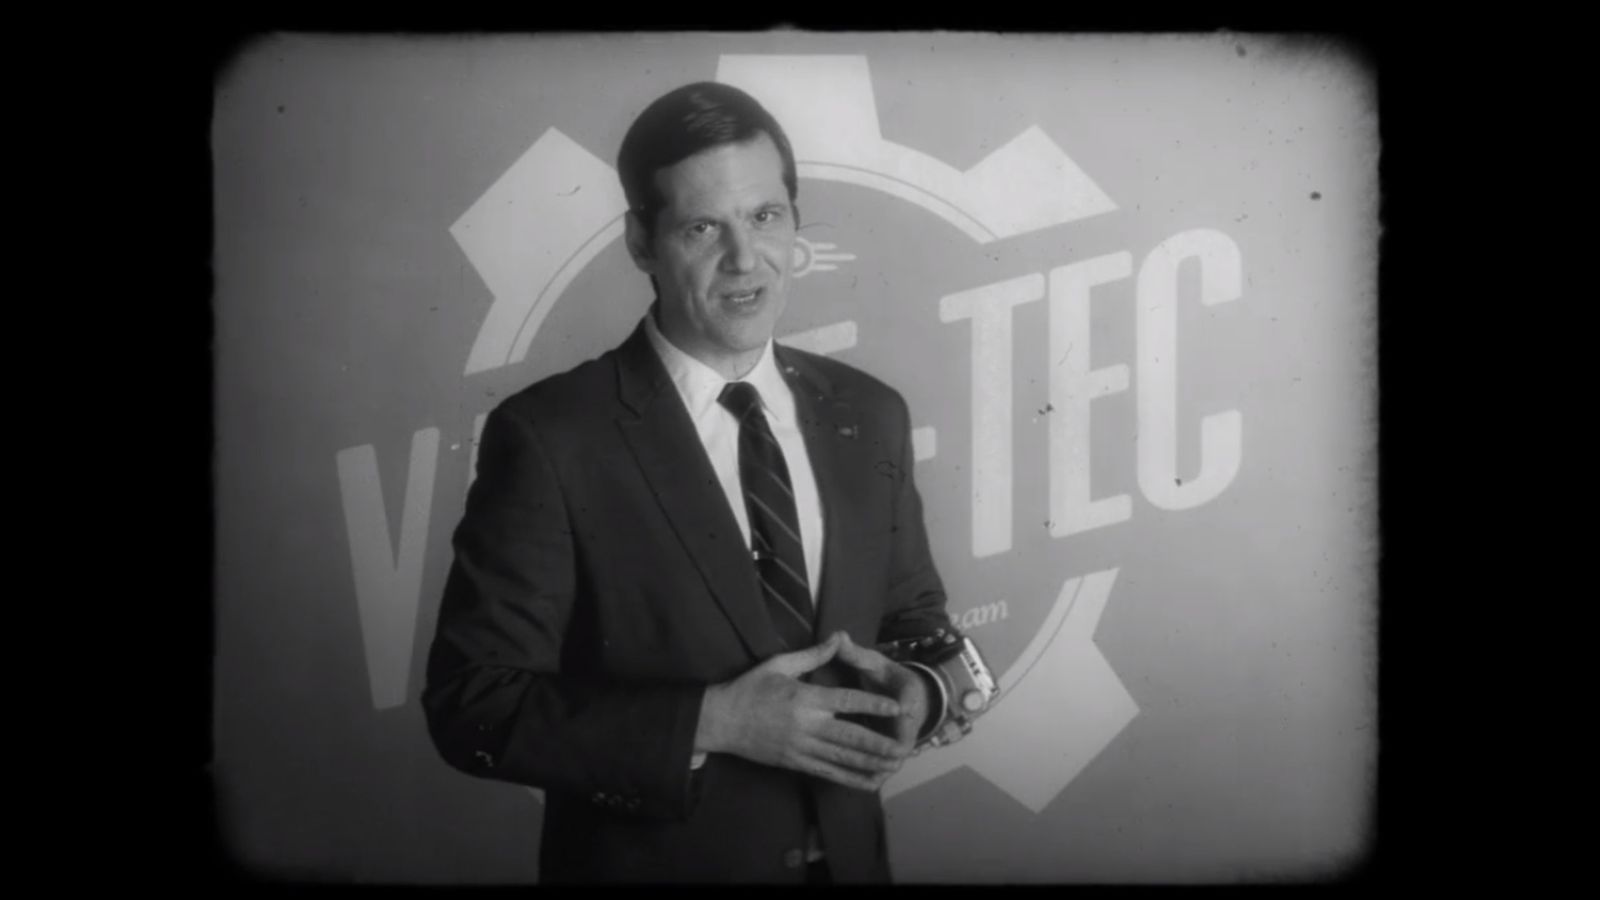 Bud Askins, Vault-Tec executive, plays a key role in one of Steph Harper's secrets in the Fallout series.